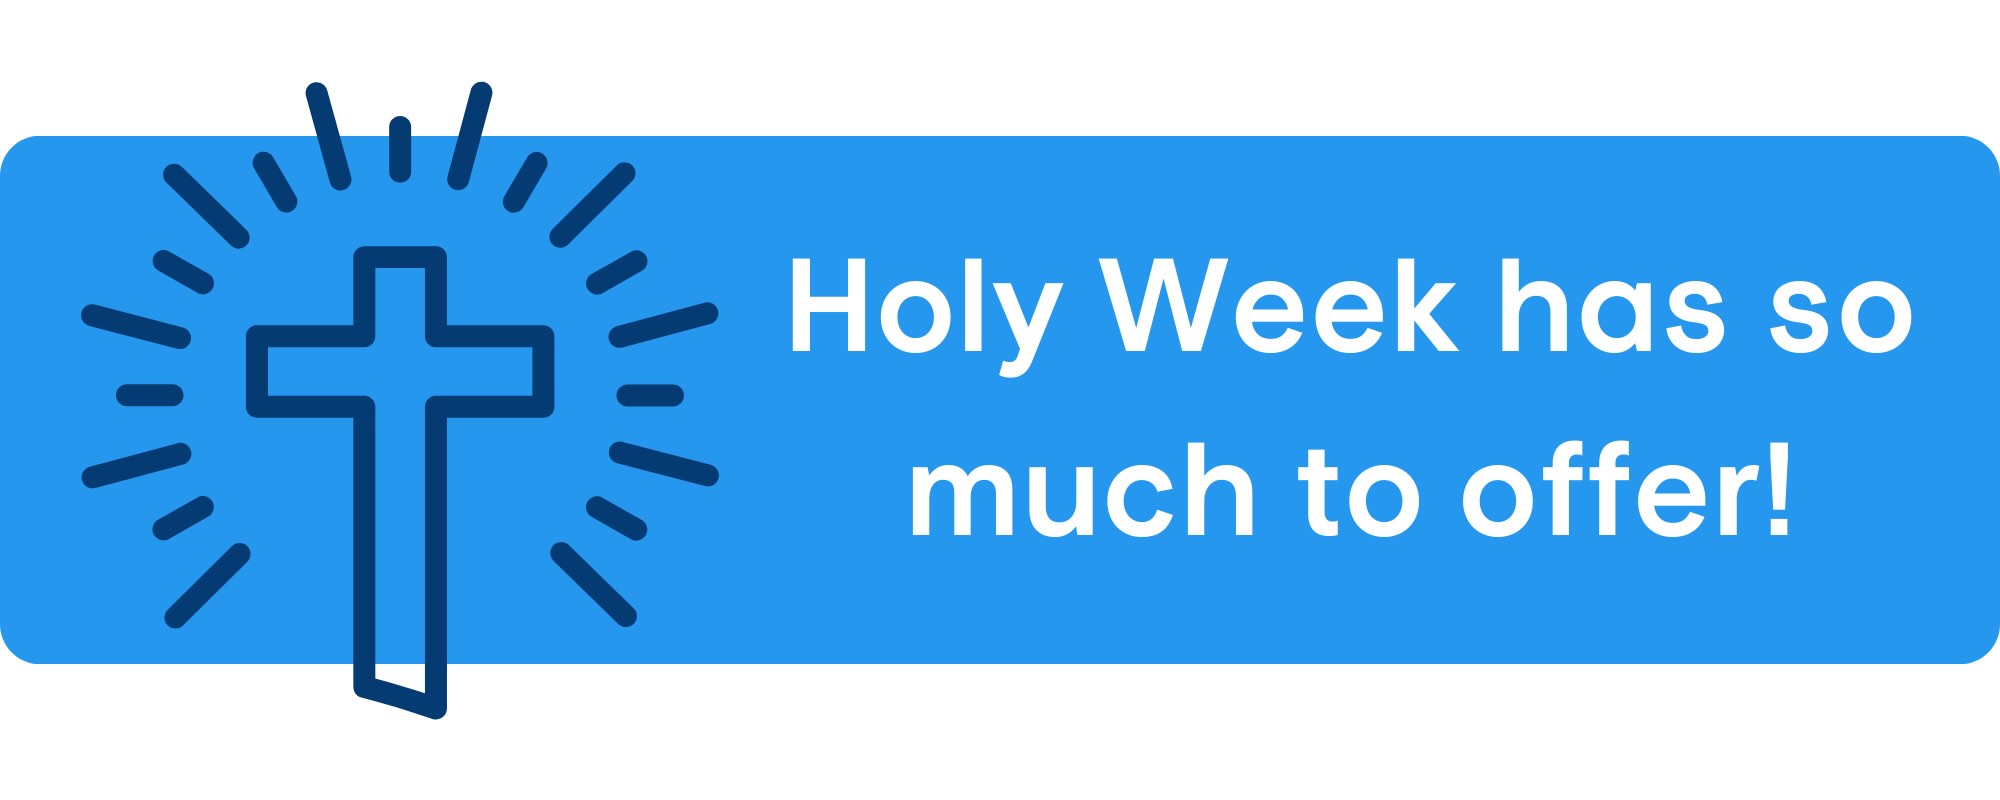 Holy Week has so much to offer from Palm Sunday to Easter Sunday